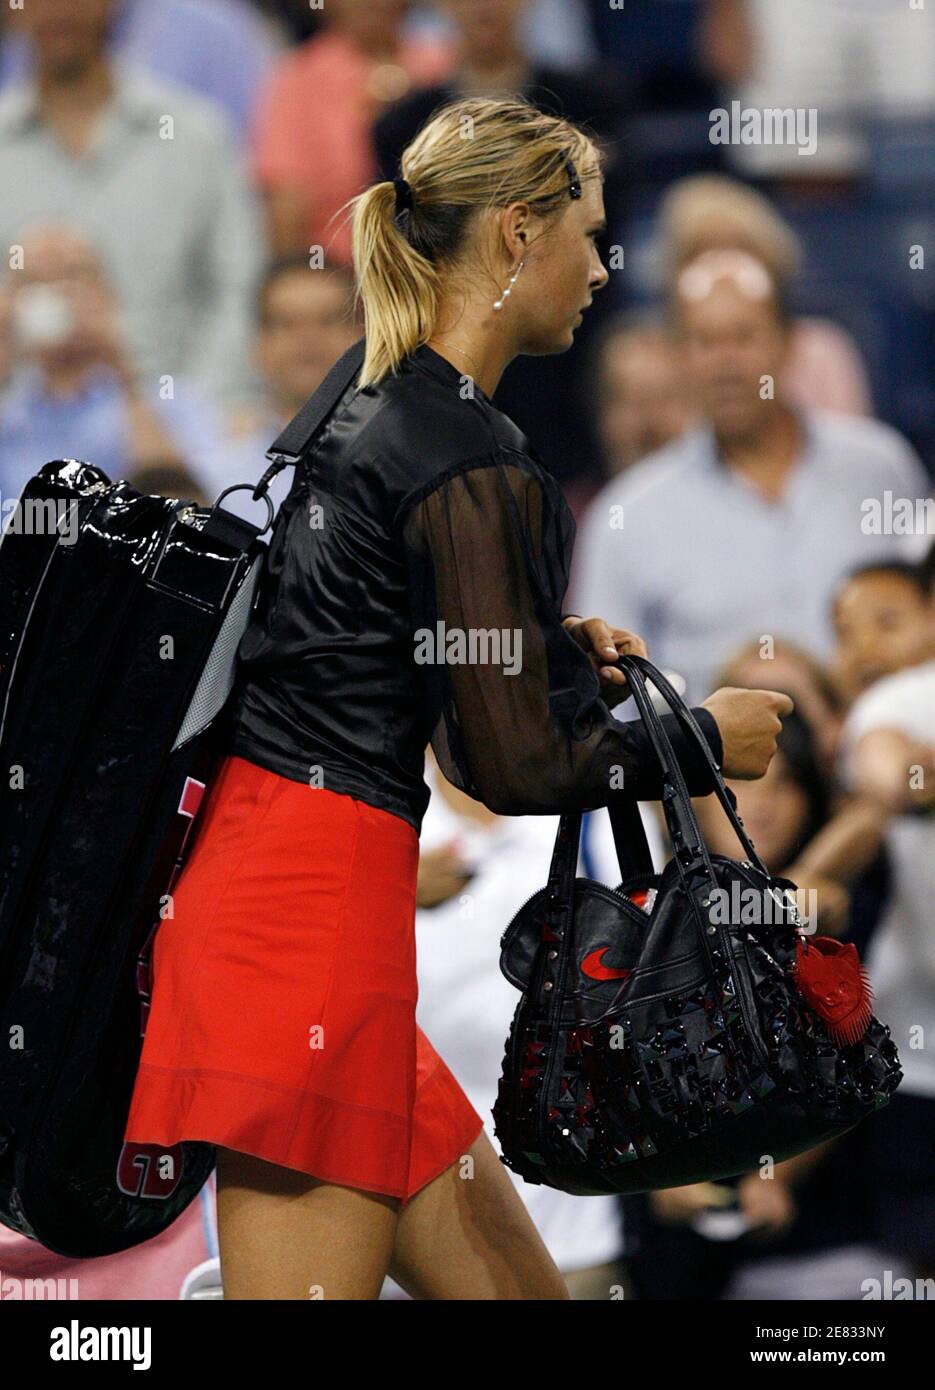 Maria Sharapova of Russia leaves the court with her hand bag and tennis bag  after defeating Roberta Vinci of Italy at the U.S. Open tennis tournament  in Flushing Meadows, New York, August